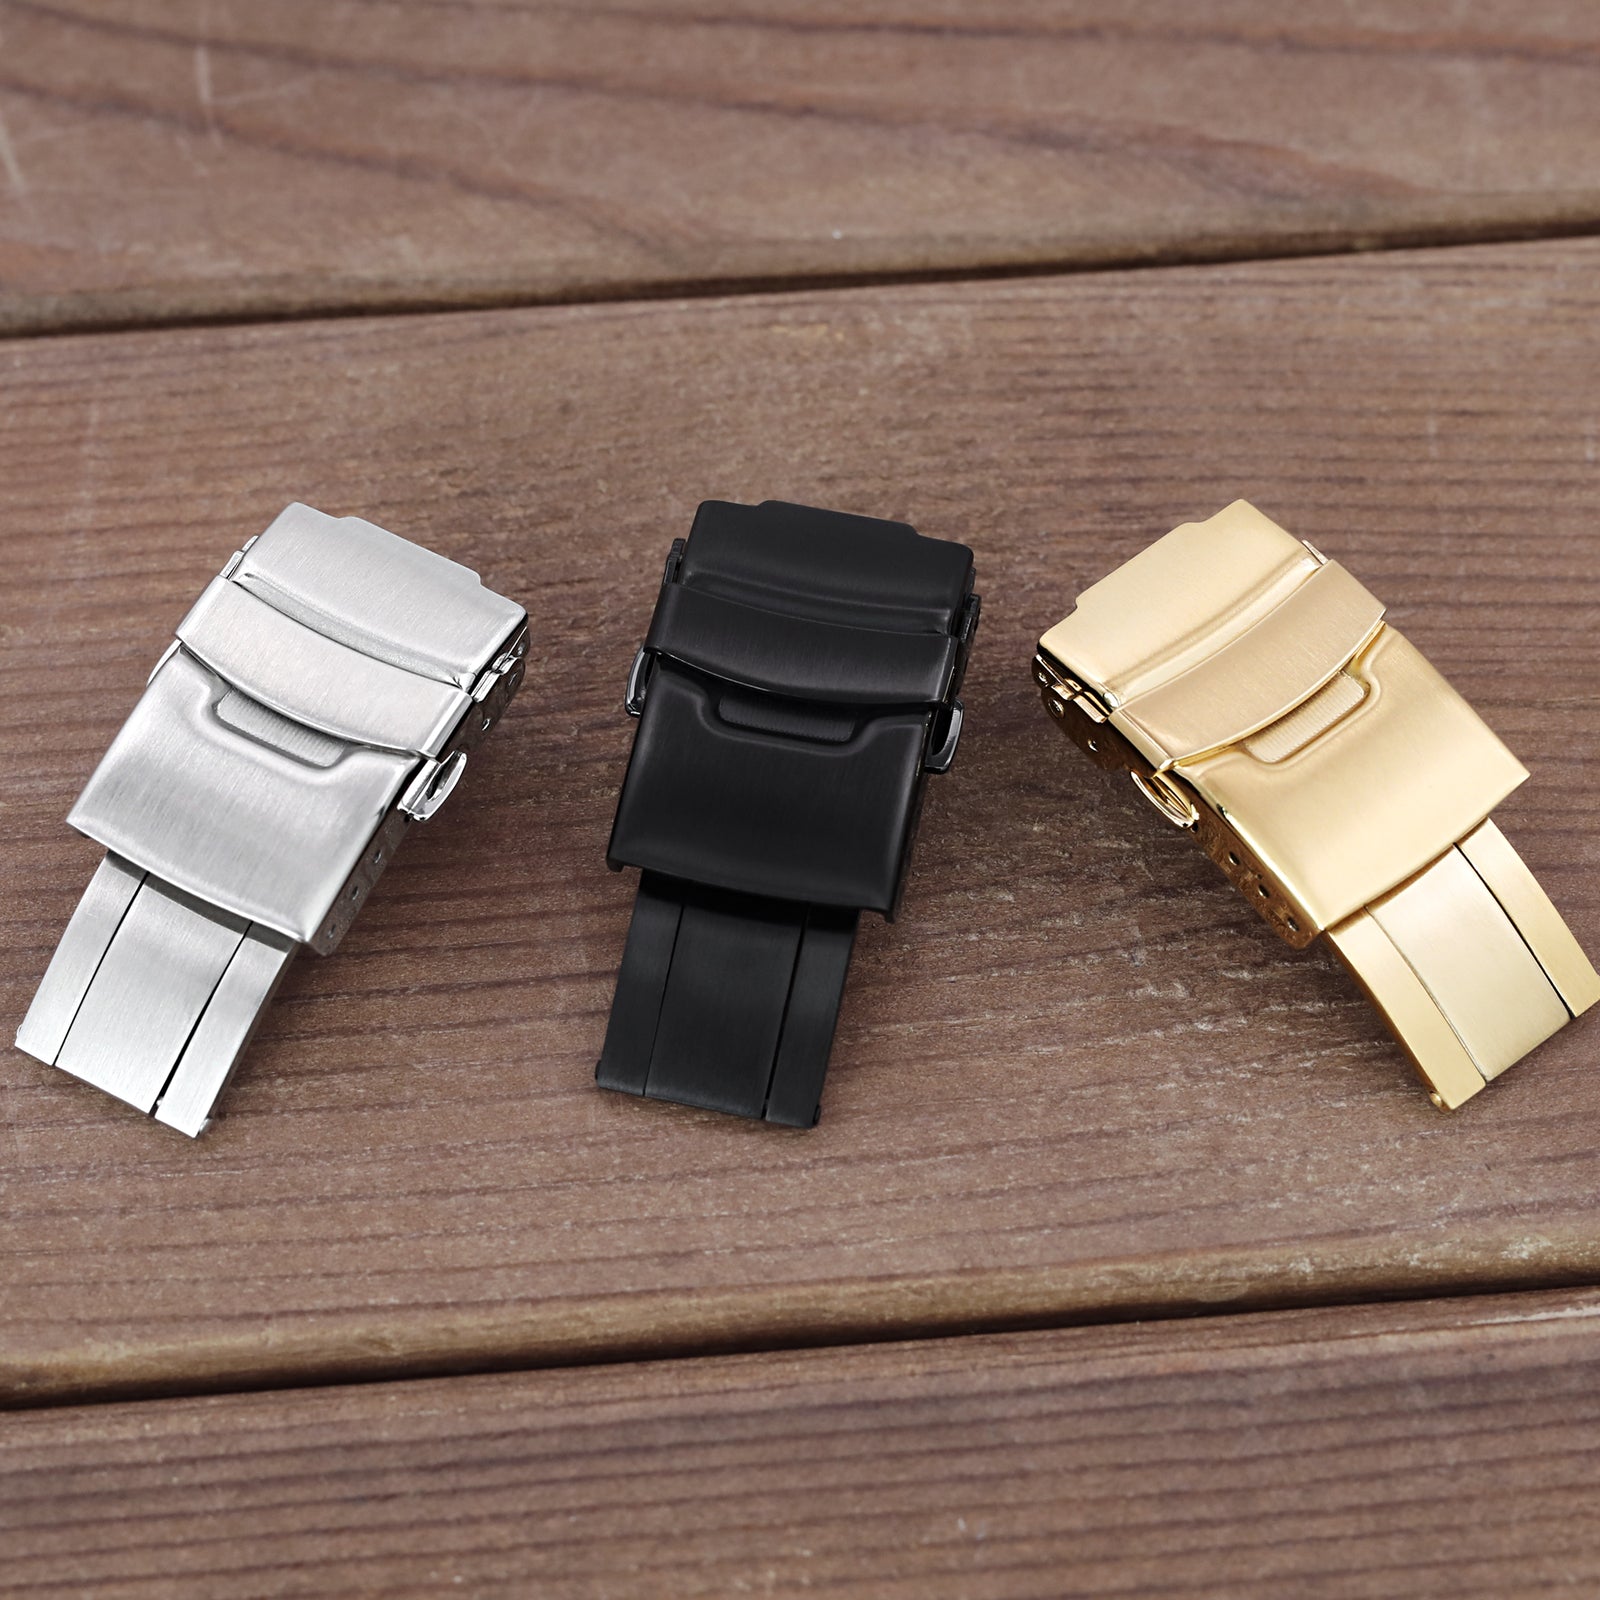 20 mm black polyurethane (PU) pin buckle watch strap to fit diver's